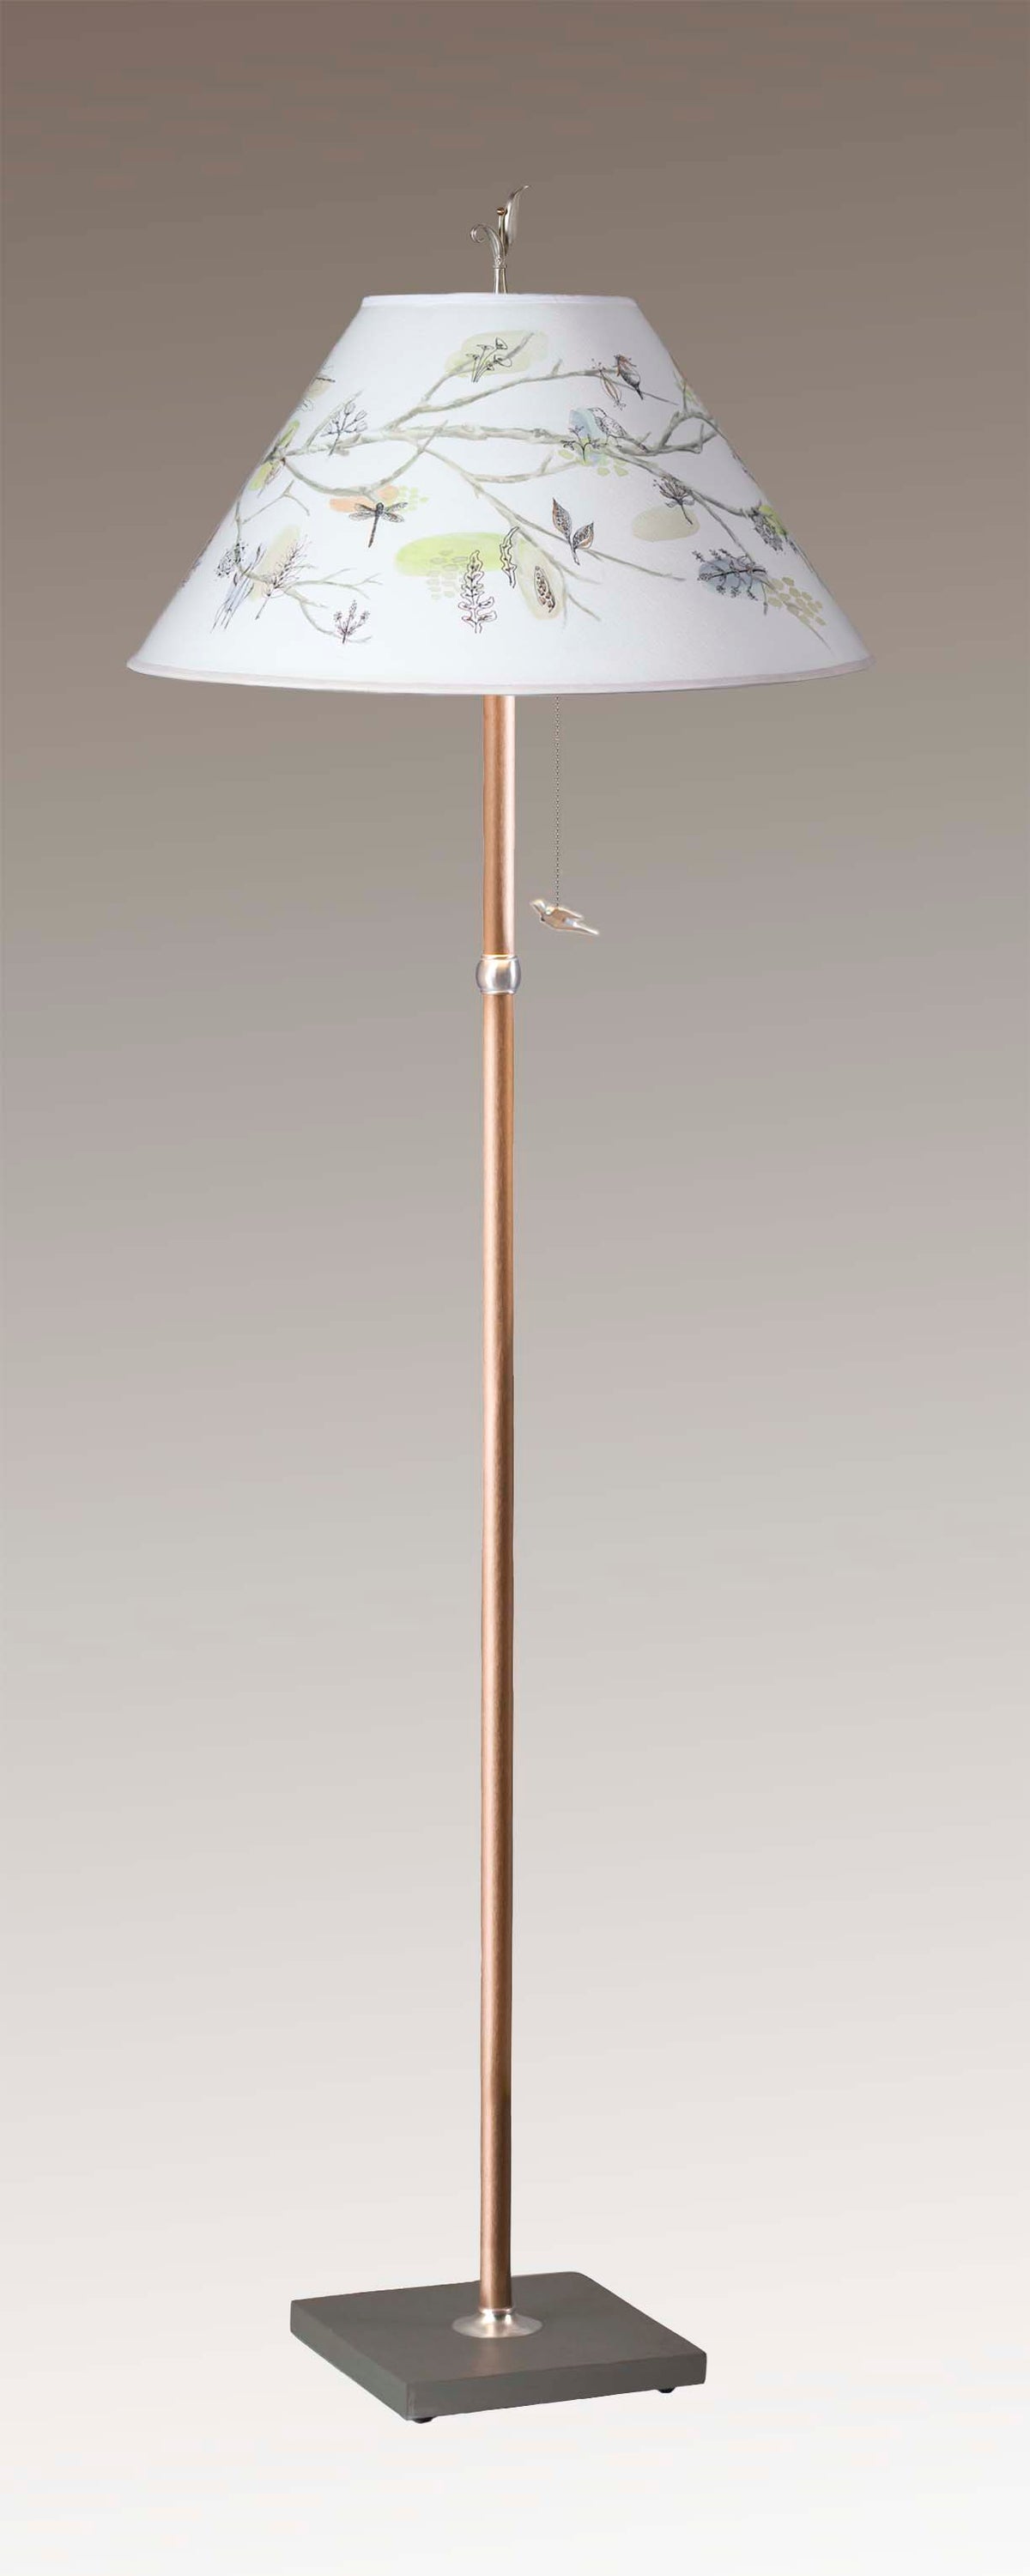 Copper Floor Lamp with Large Conical Shade in Artful Branch